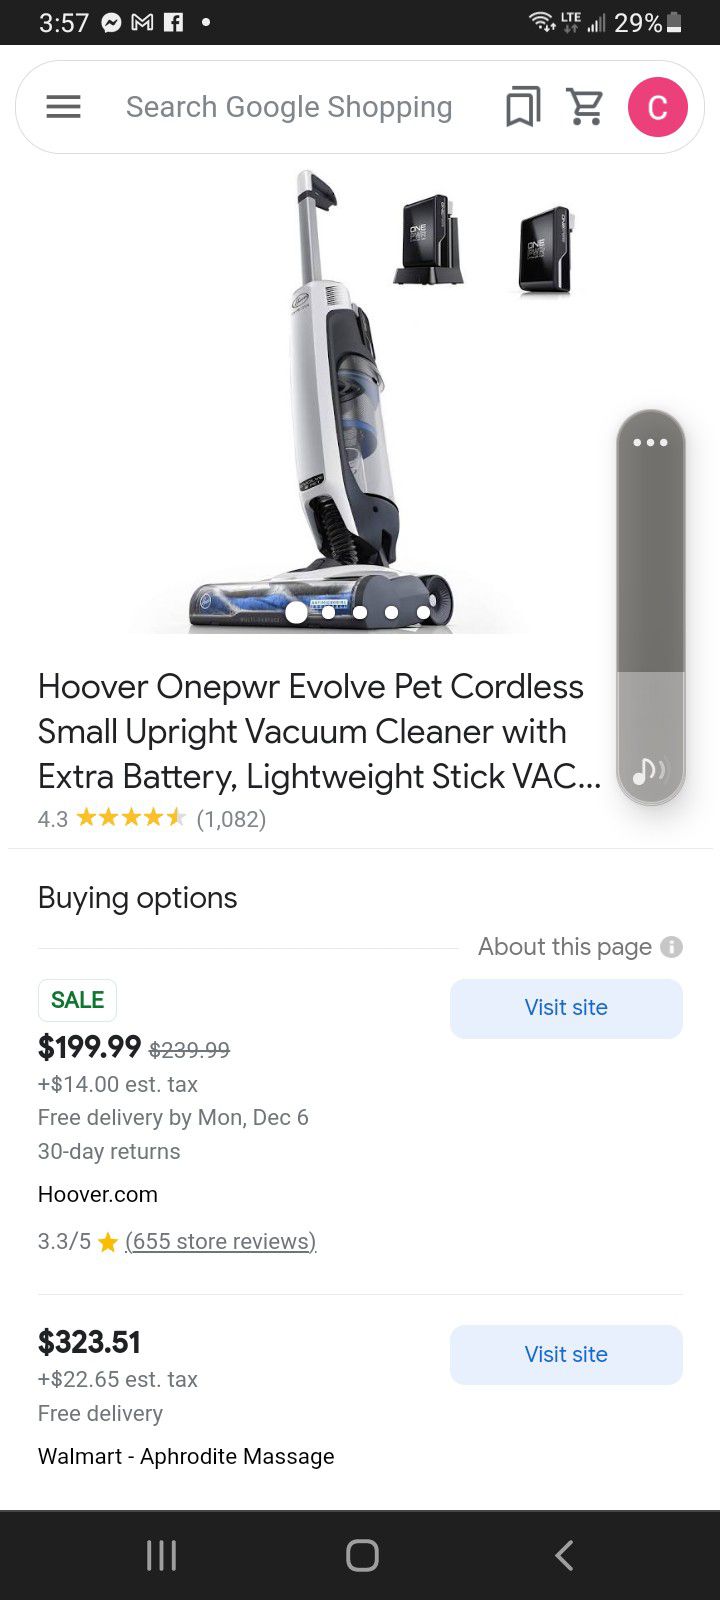 Hoover Onepwr Evolve Pet